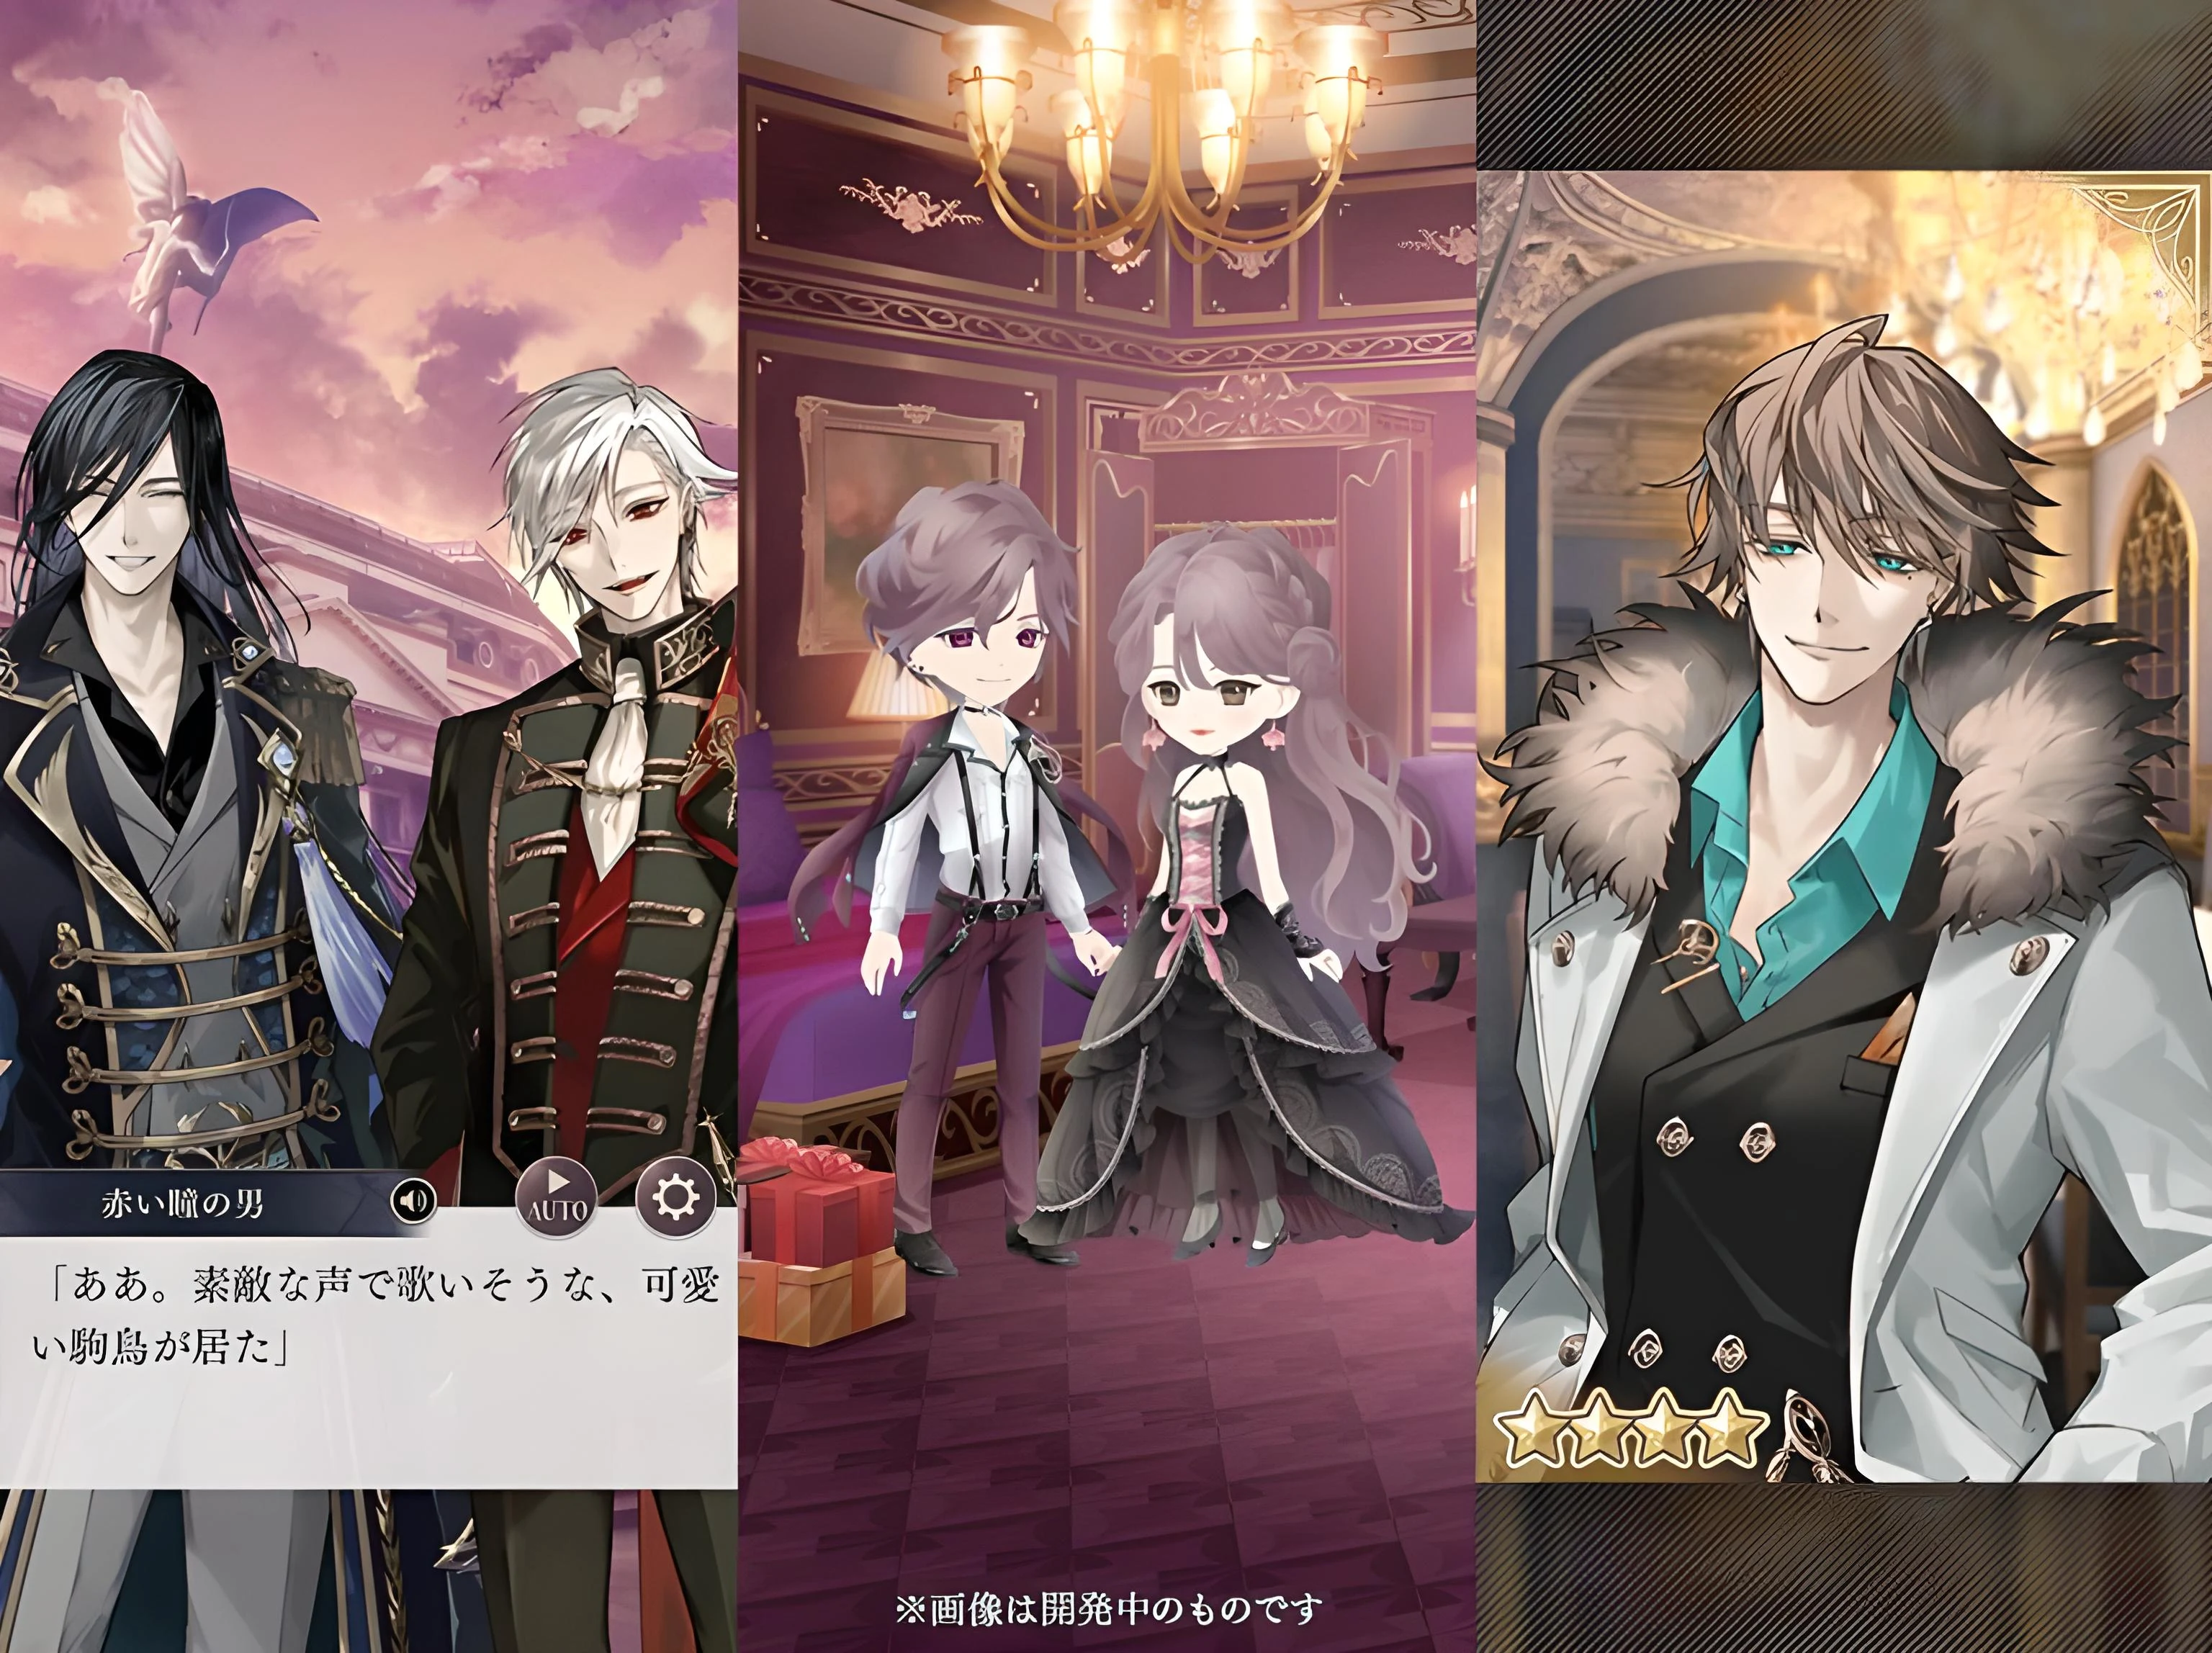 Ikemen Villains Now Available For Download - Characters and Cast Revealed